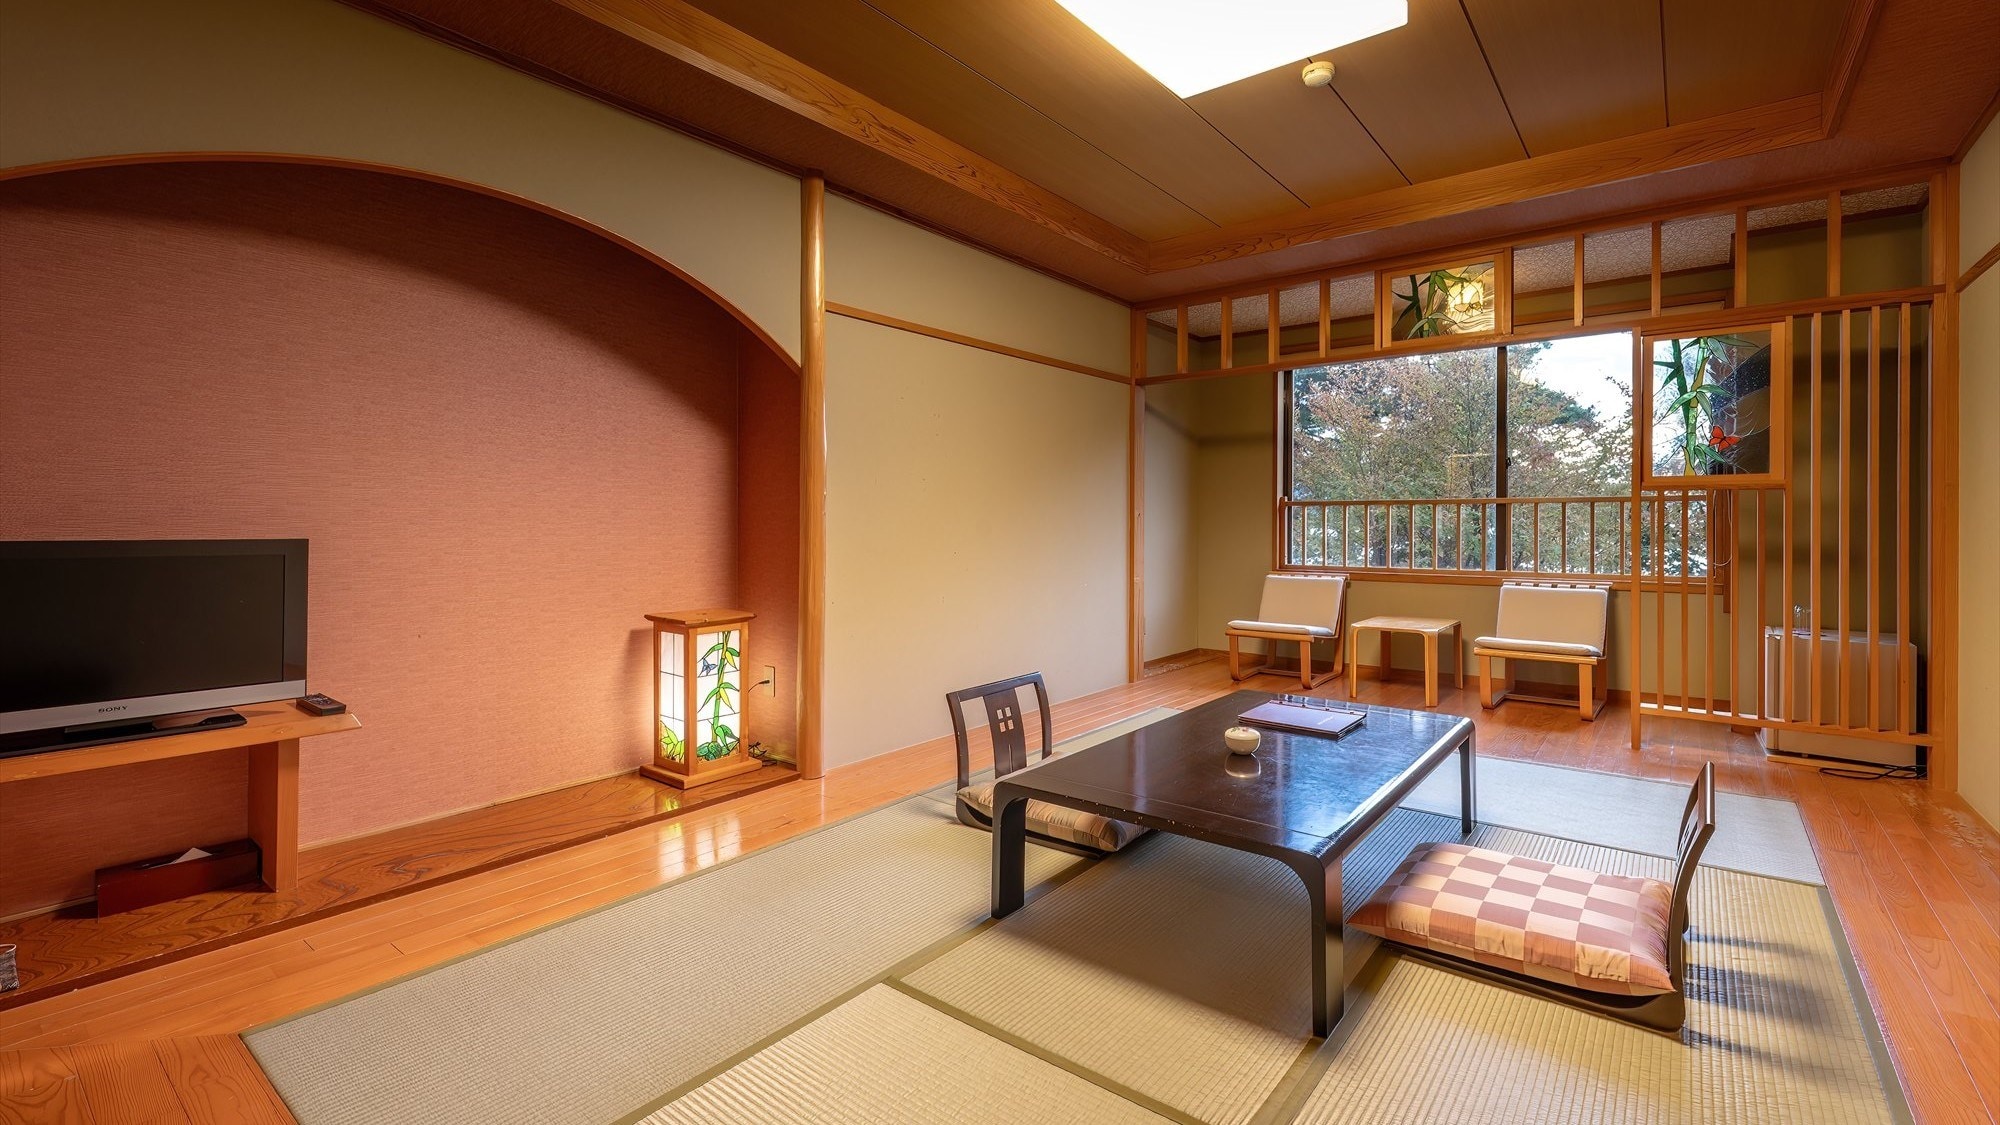 ■There are two types of Japanese-style rooms with wide verandas and playful stained glass windows. *Room type cannot be selected.